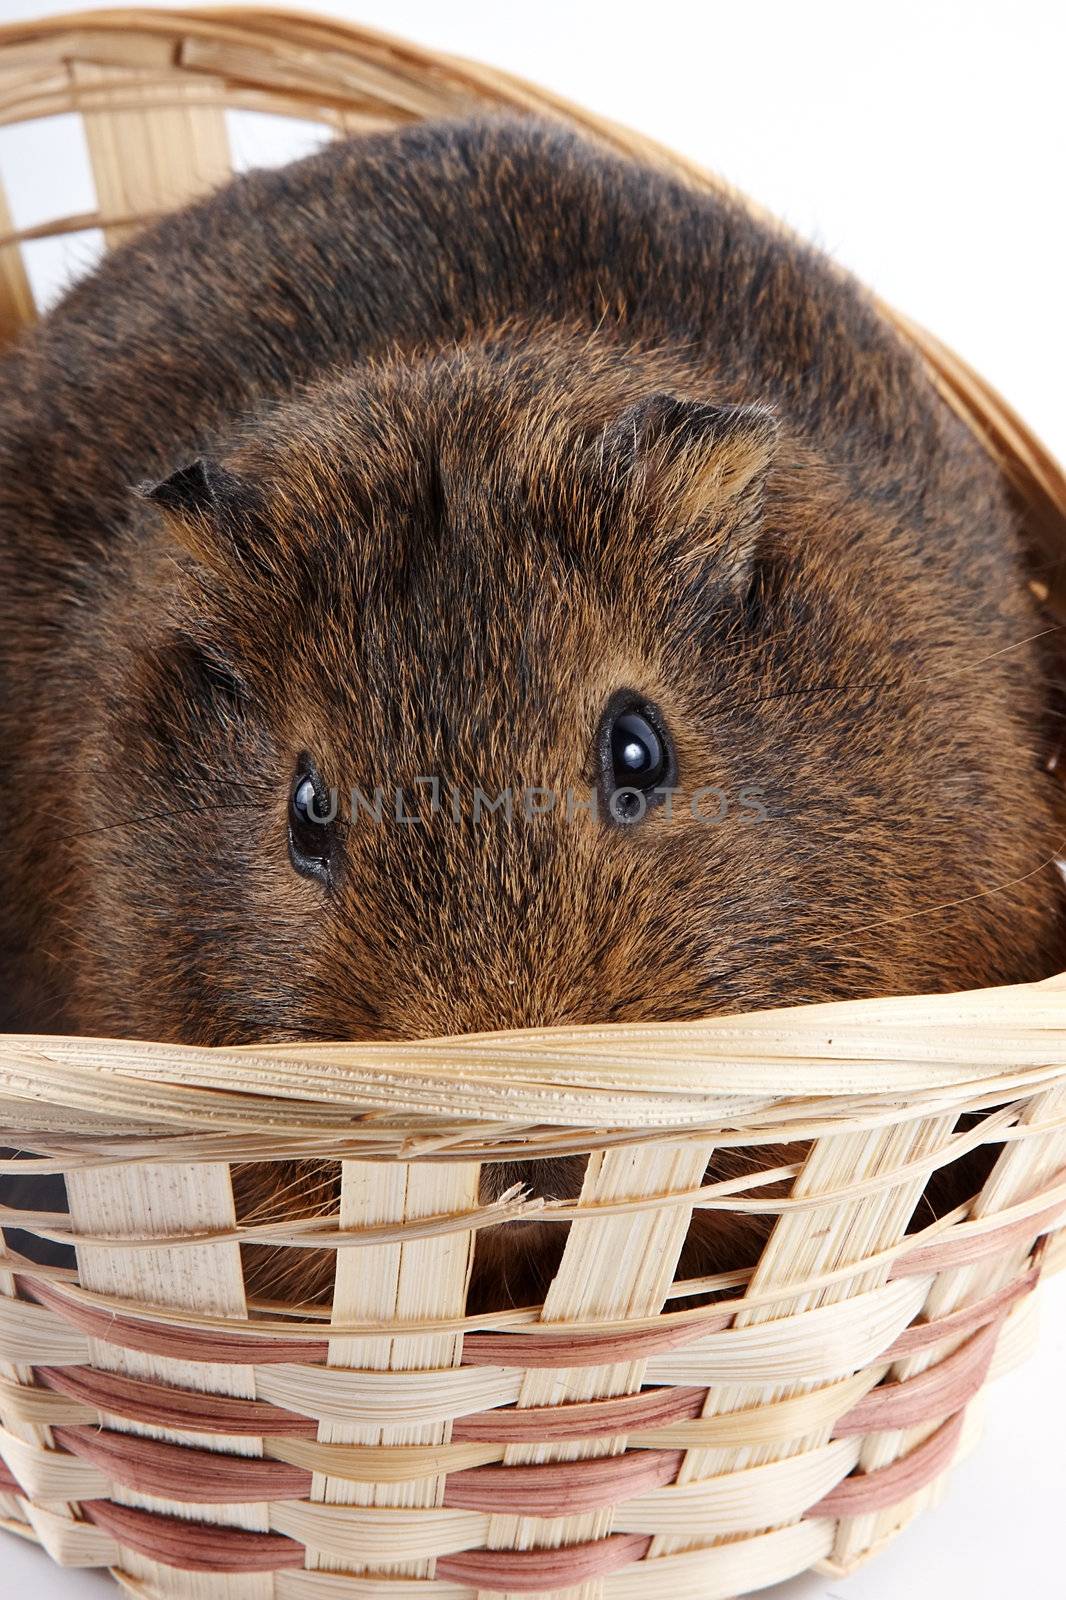 The frightened guinea pig in a wattled basket